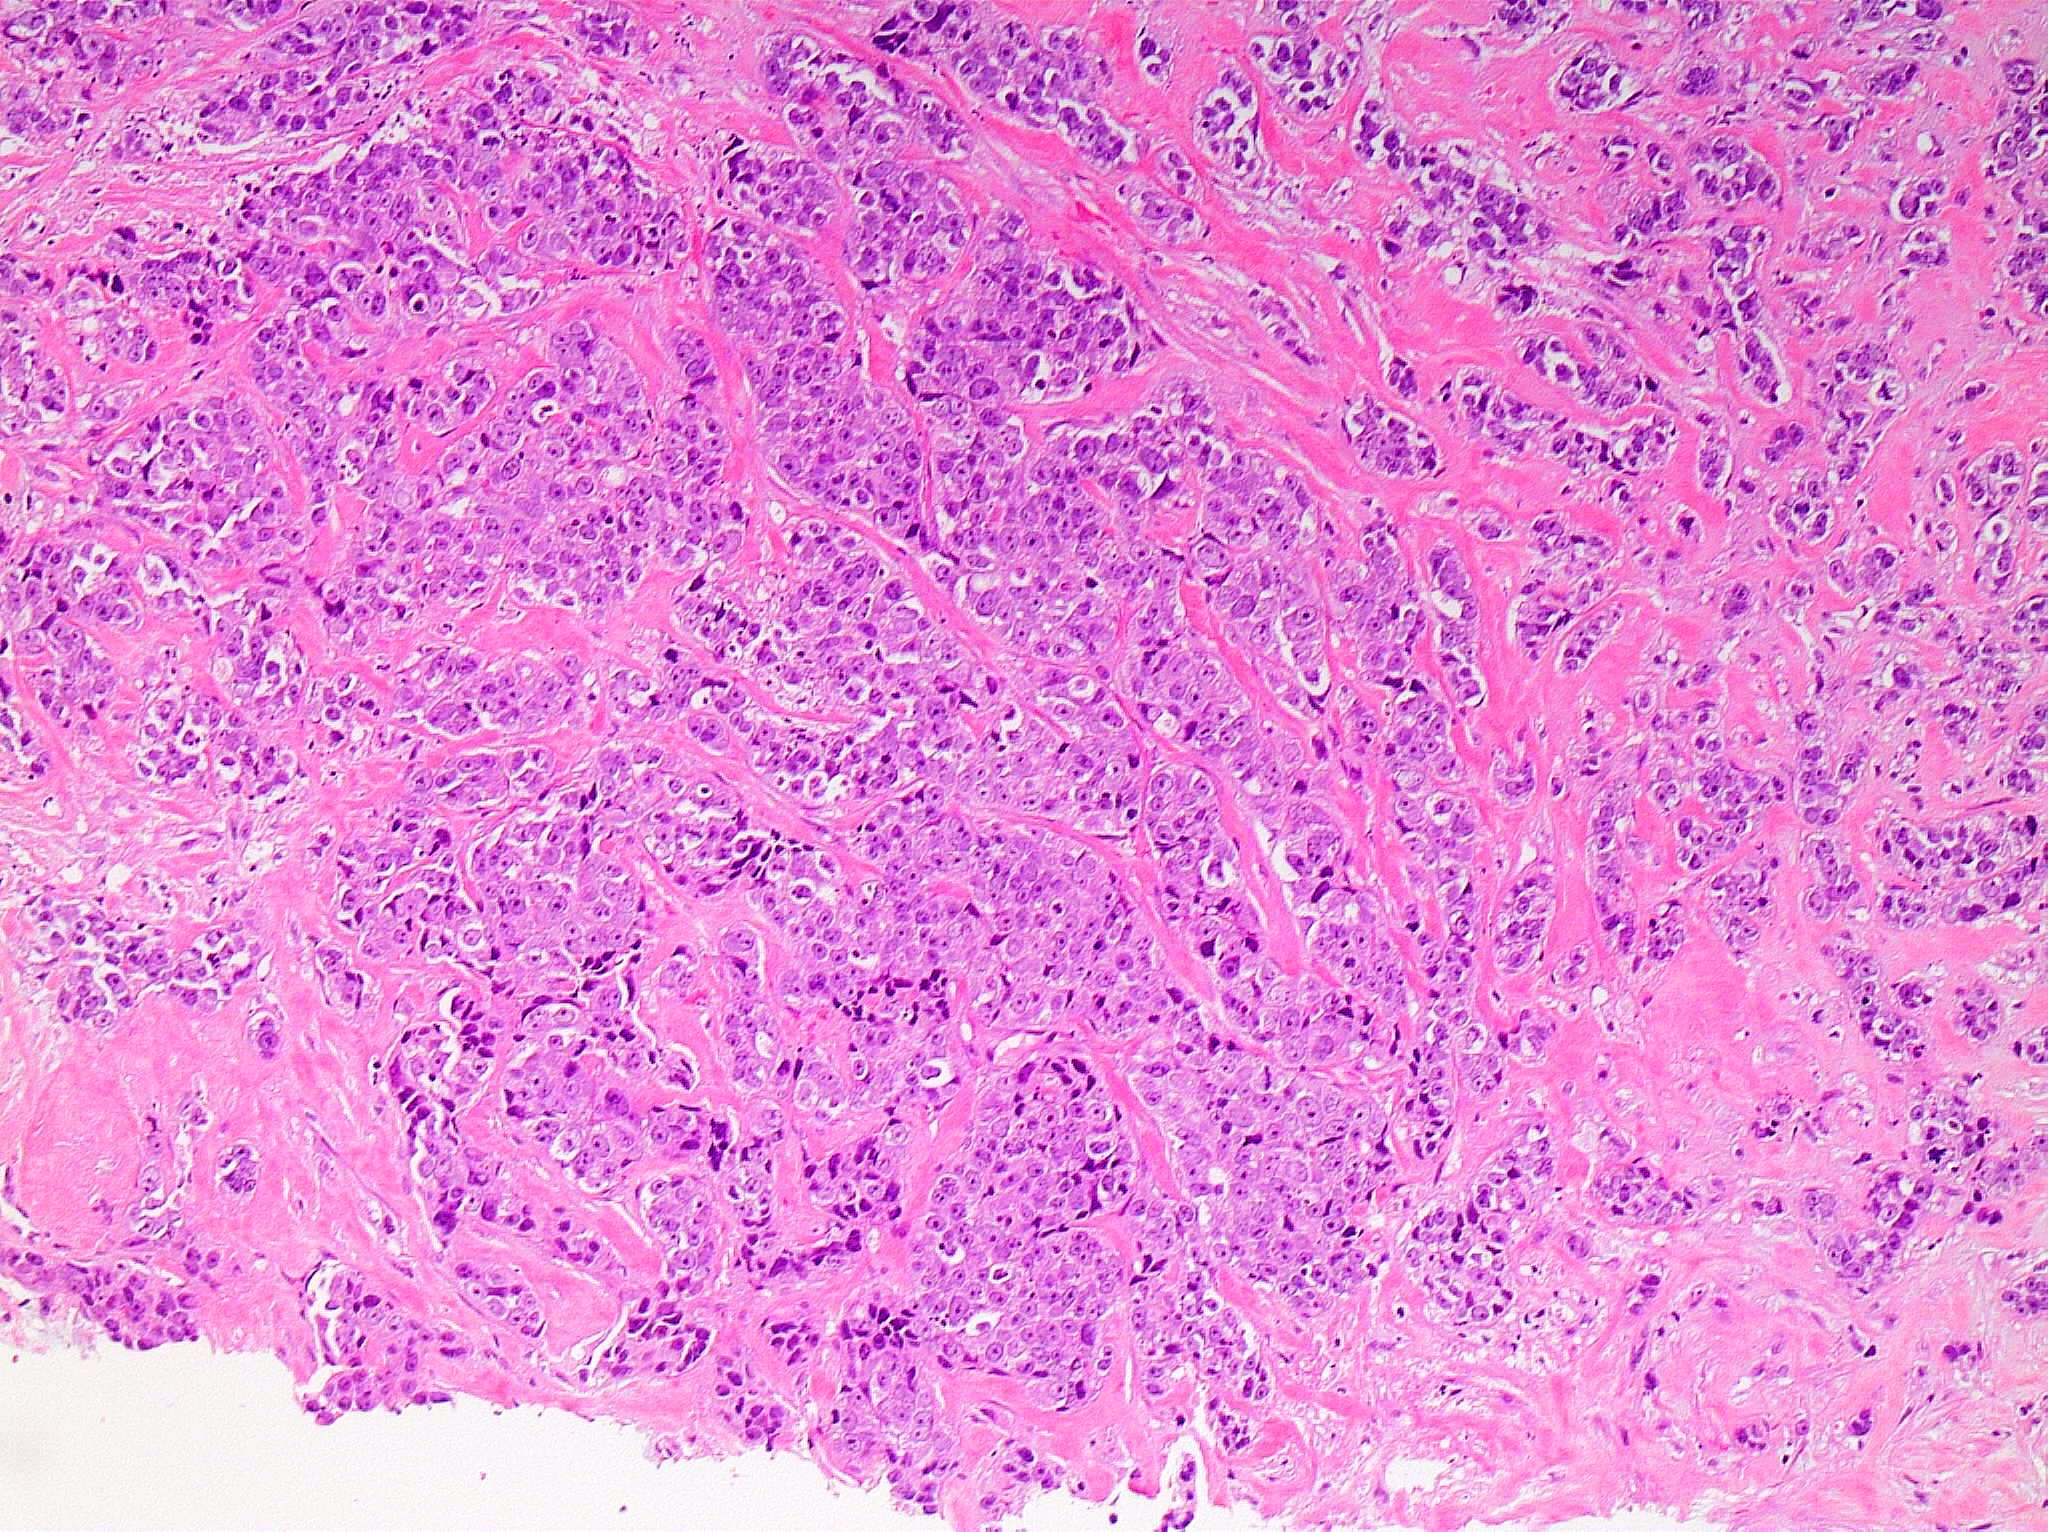 SOX10 positive invasive ductal carcinoma